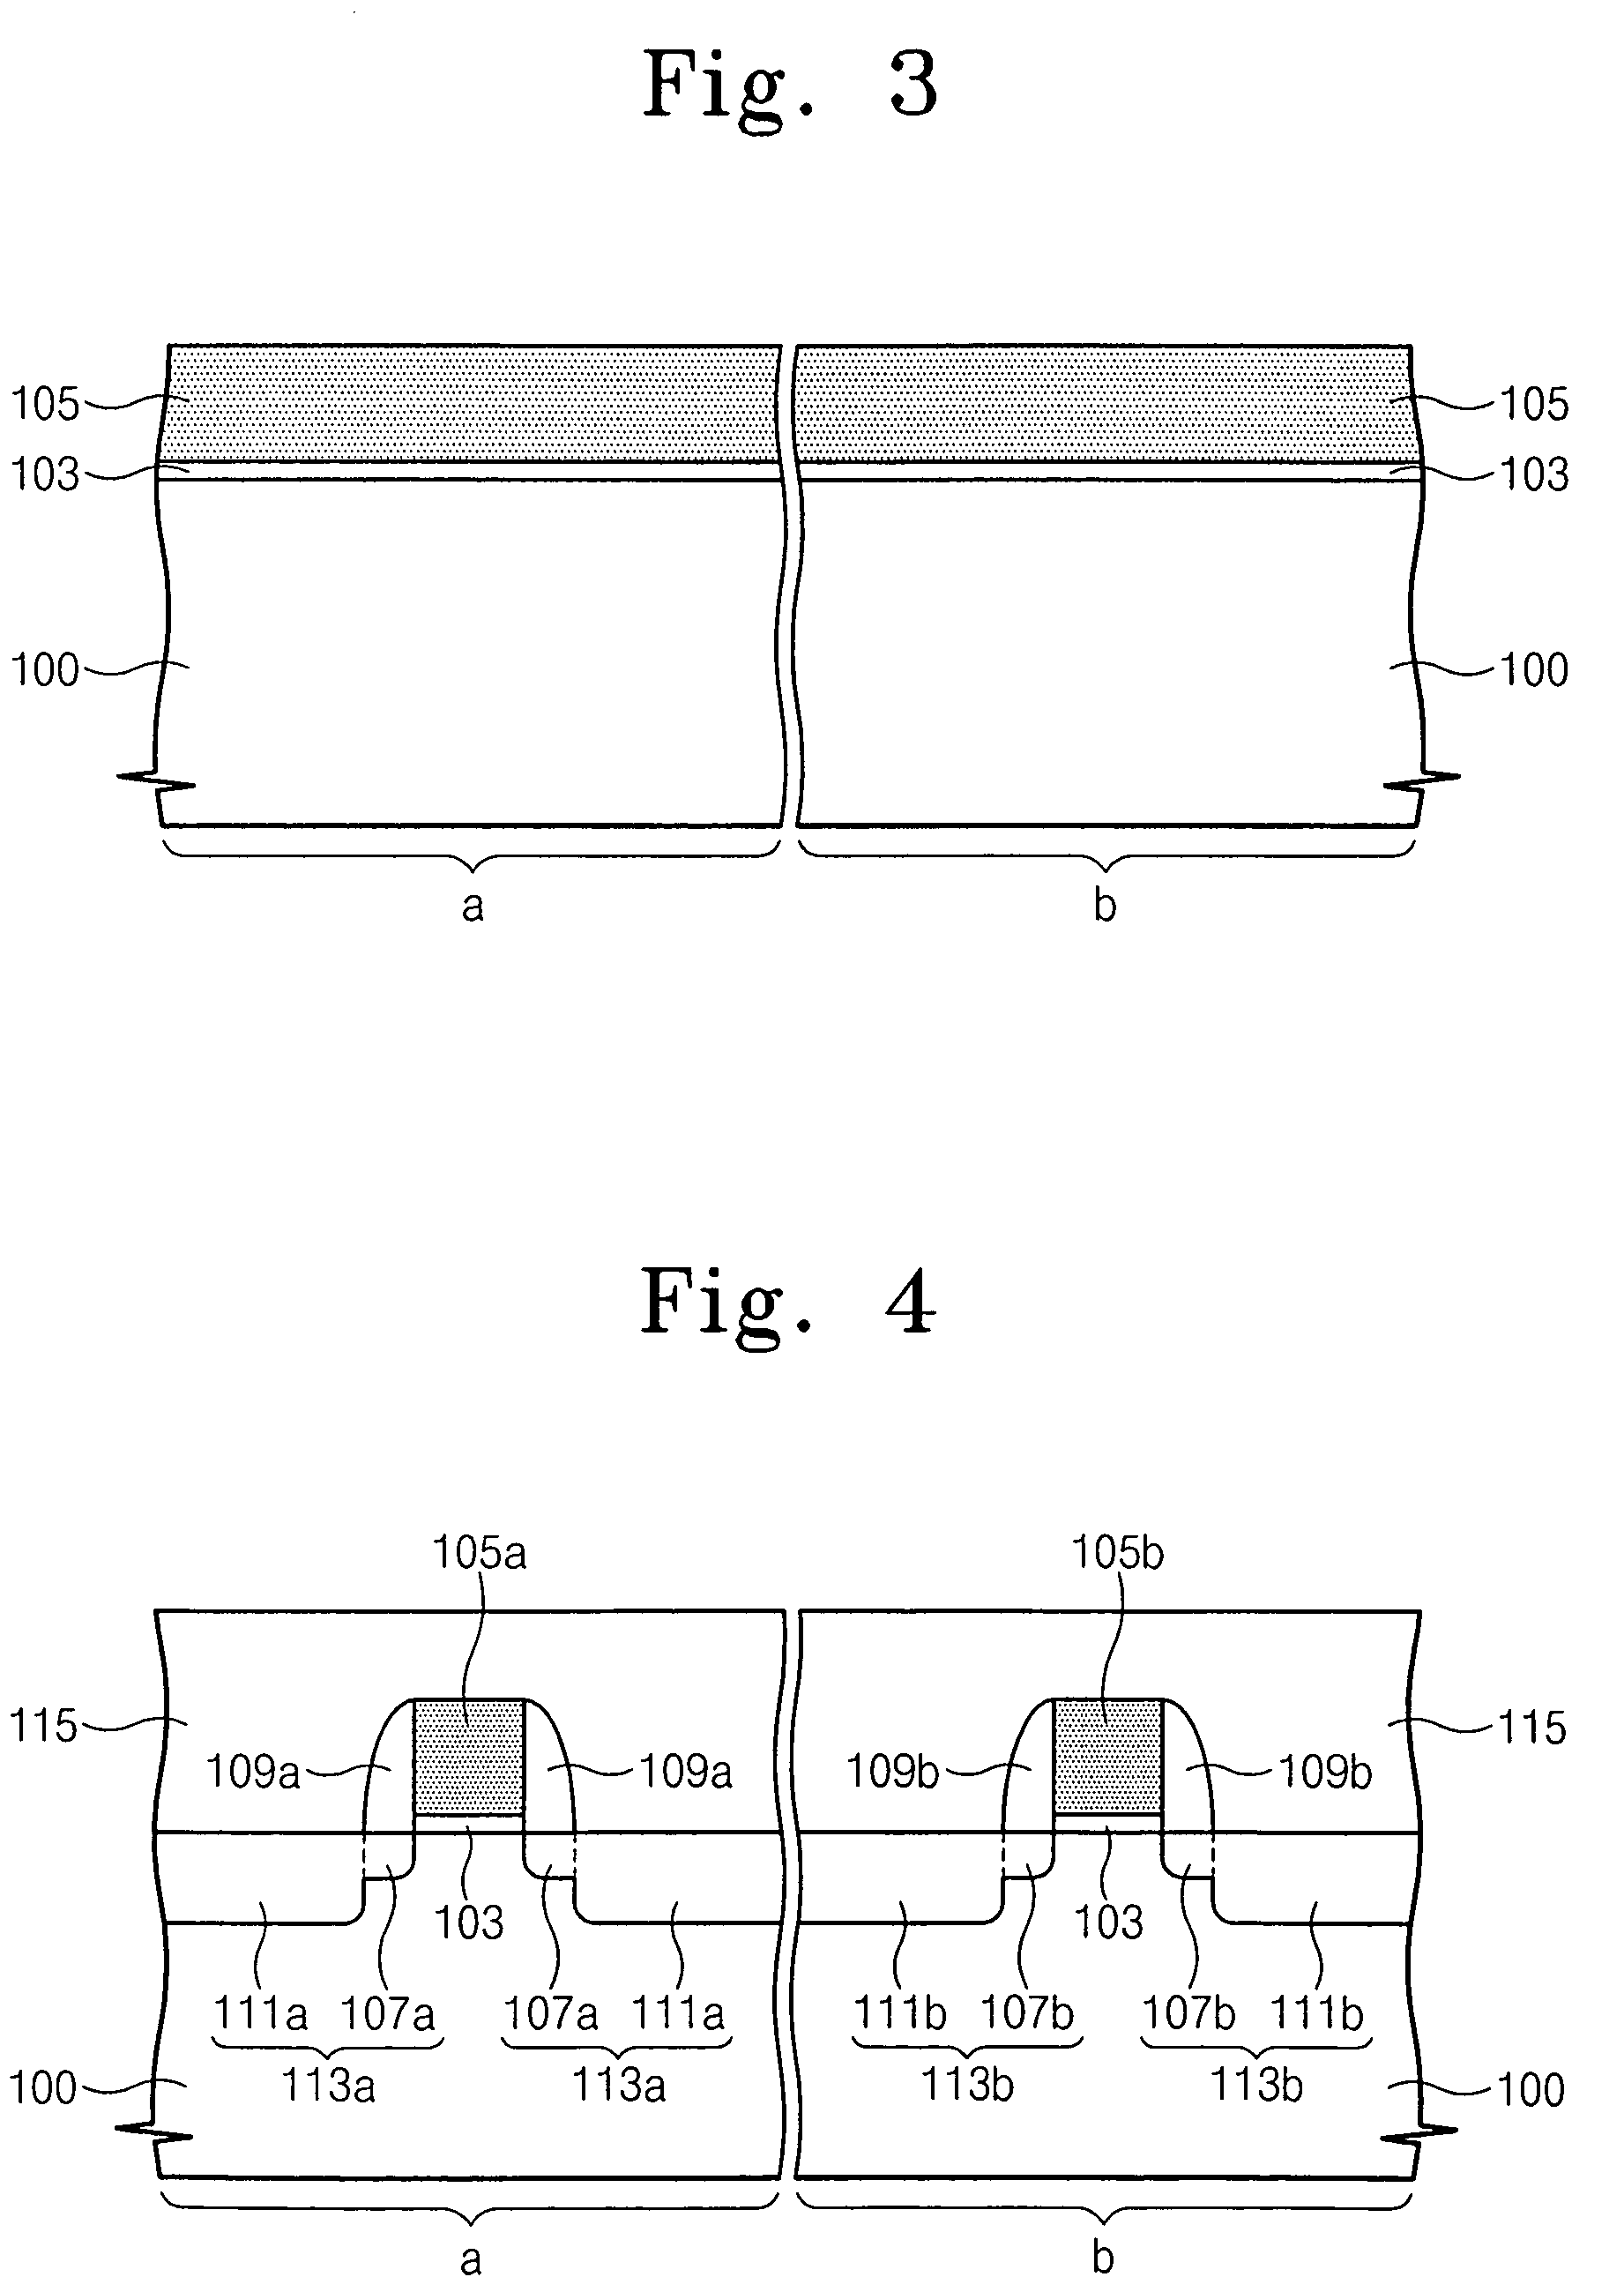 Semiconductor device having a dual gate electrode and methods of forming the same